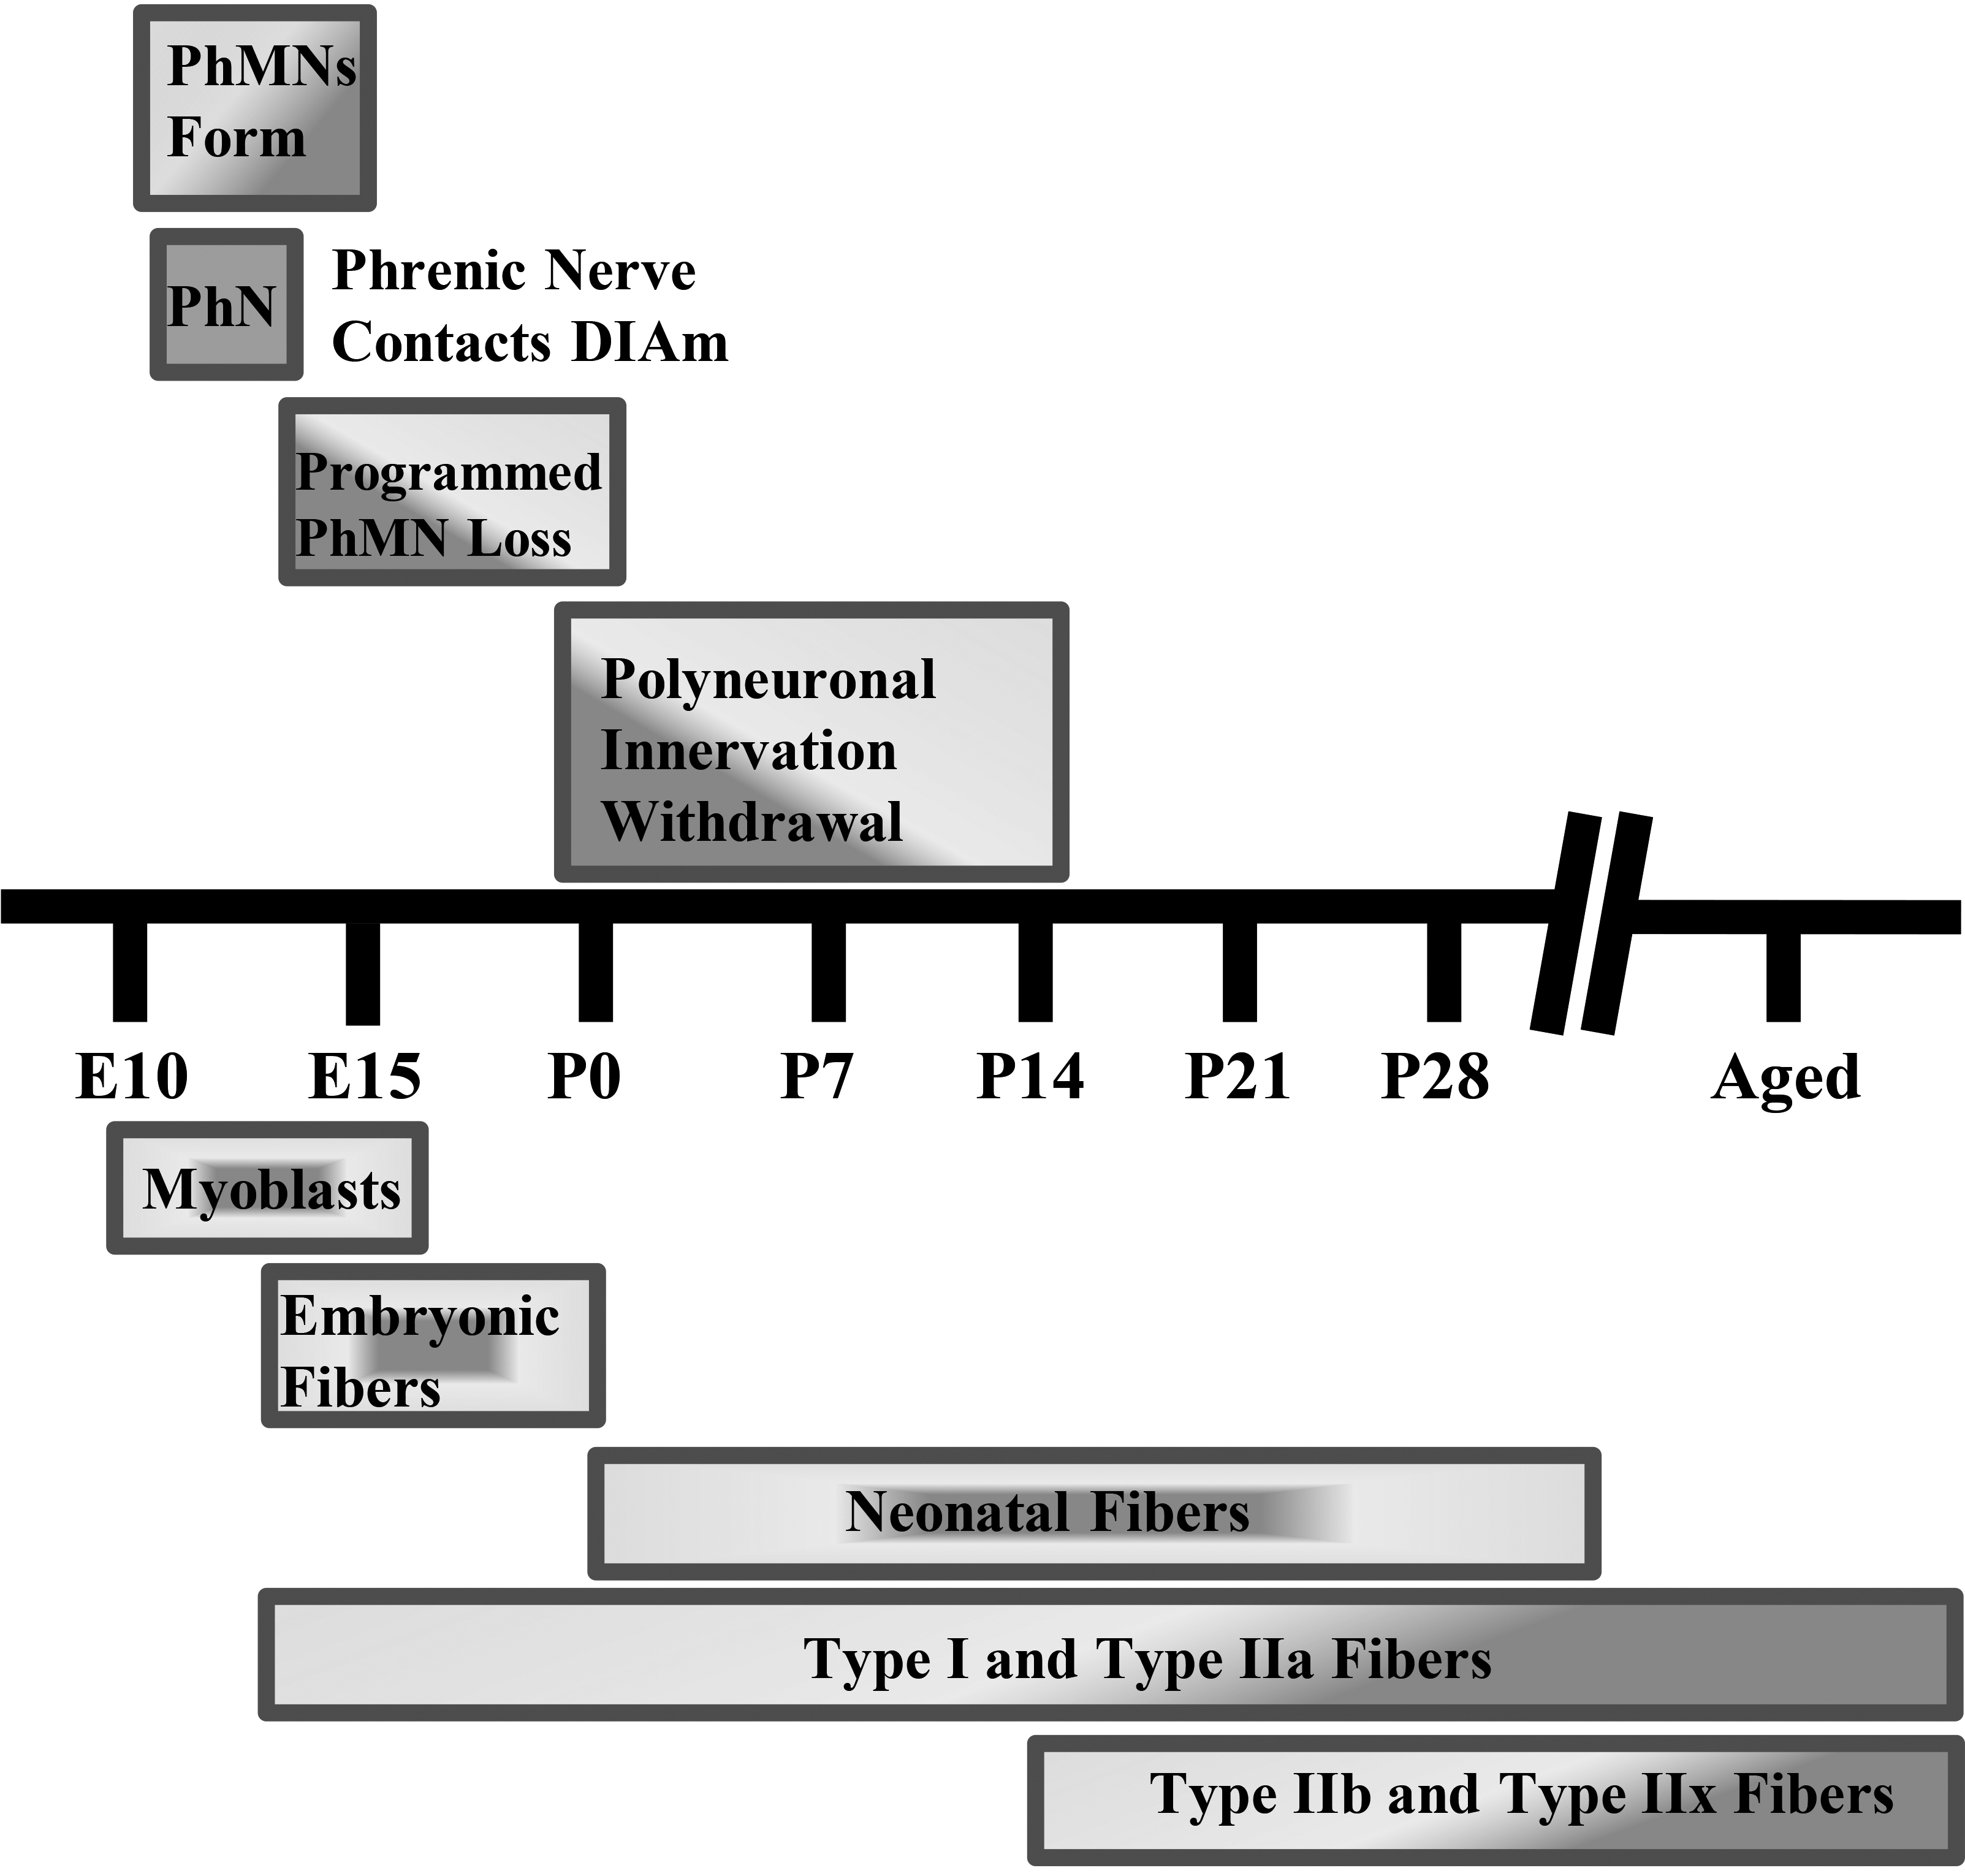 Diaphragm motor unit development timeline in rodents. Phrenic motor neuron (PhMN) and diaphragm (DIAm) developmental timing in rodents. Rodent gestation is approximately 18–20 days. PhMN development begins around embryonic day 10 (E10), with the phrenic nerve contacting the DIAm around the same time. For the DIAm, myoblasts form around E12, rapidly transitioning to immature embryonic and neonatal muscle fibers with emergence of Type I and IIa muscle fibers. Type IIb and/or IIx DIAm fibers are the last to emerge and do so around postnatal day 14 (P14). Type I, IIa, IIb, and/or IIx are the complement of fiber types present by maturity. 